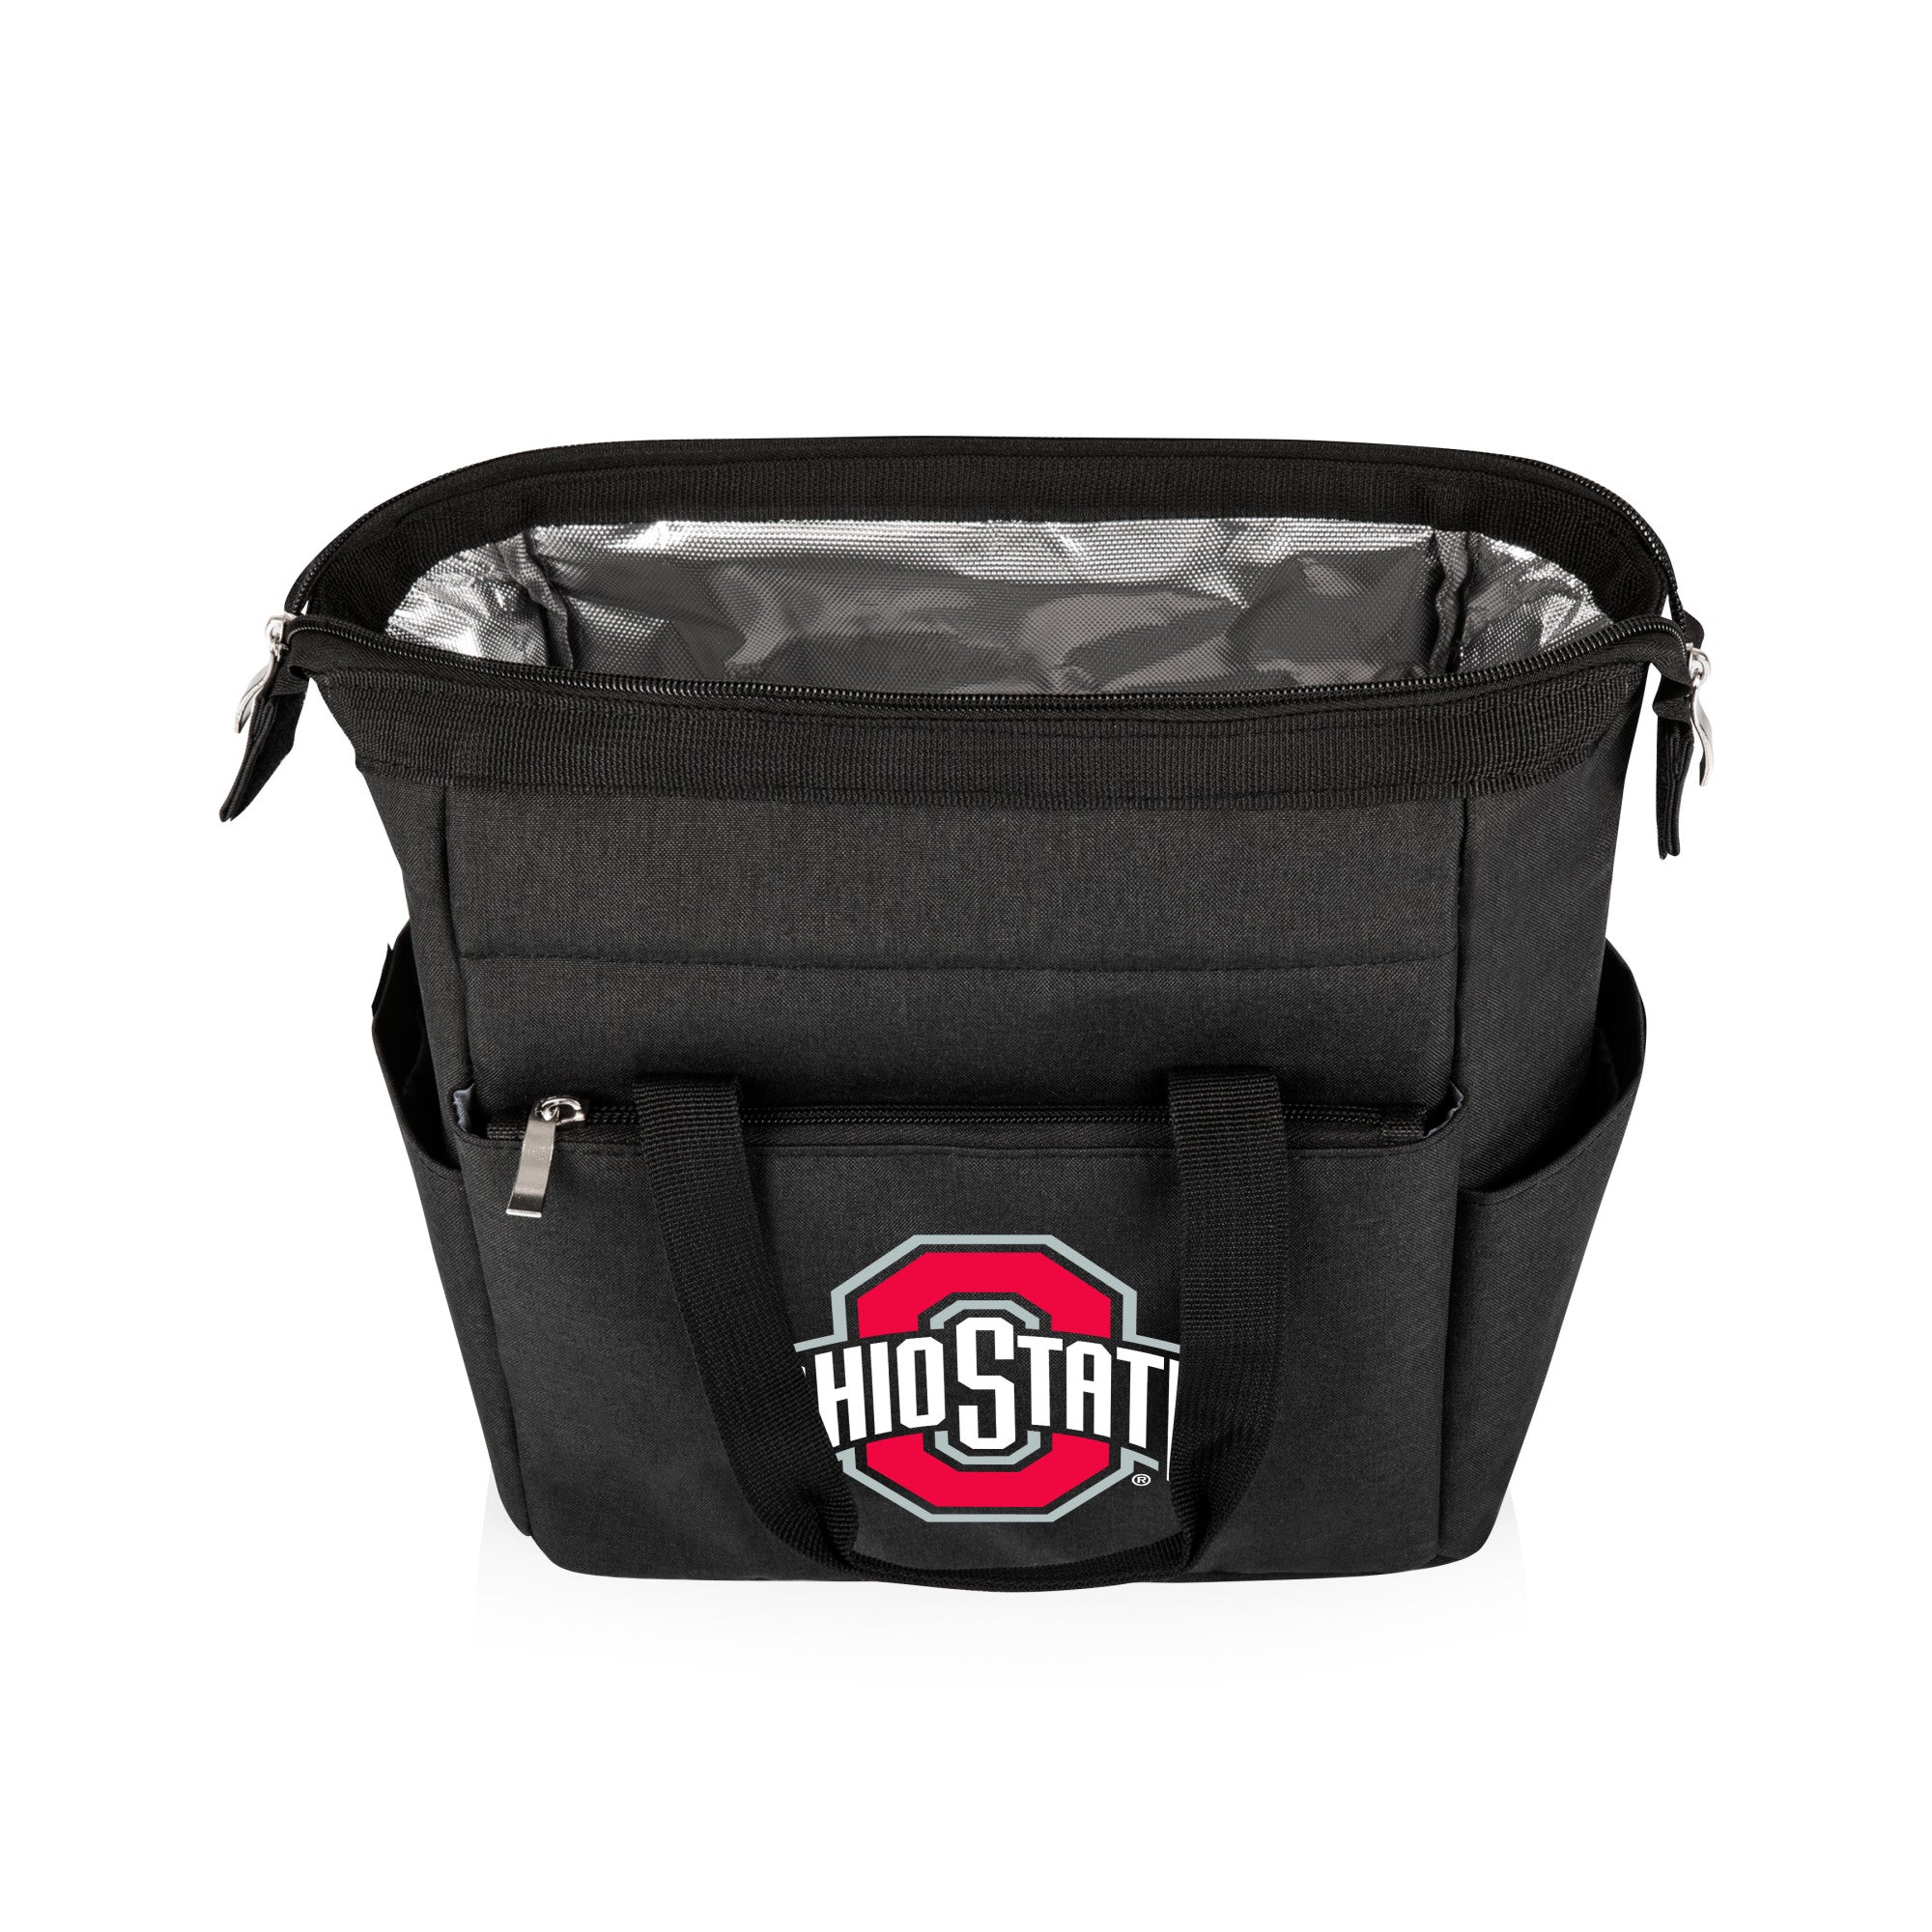 Ohio State Buckeyes - On The Go Lunch Bag Cooler